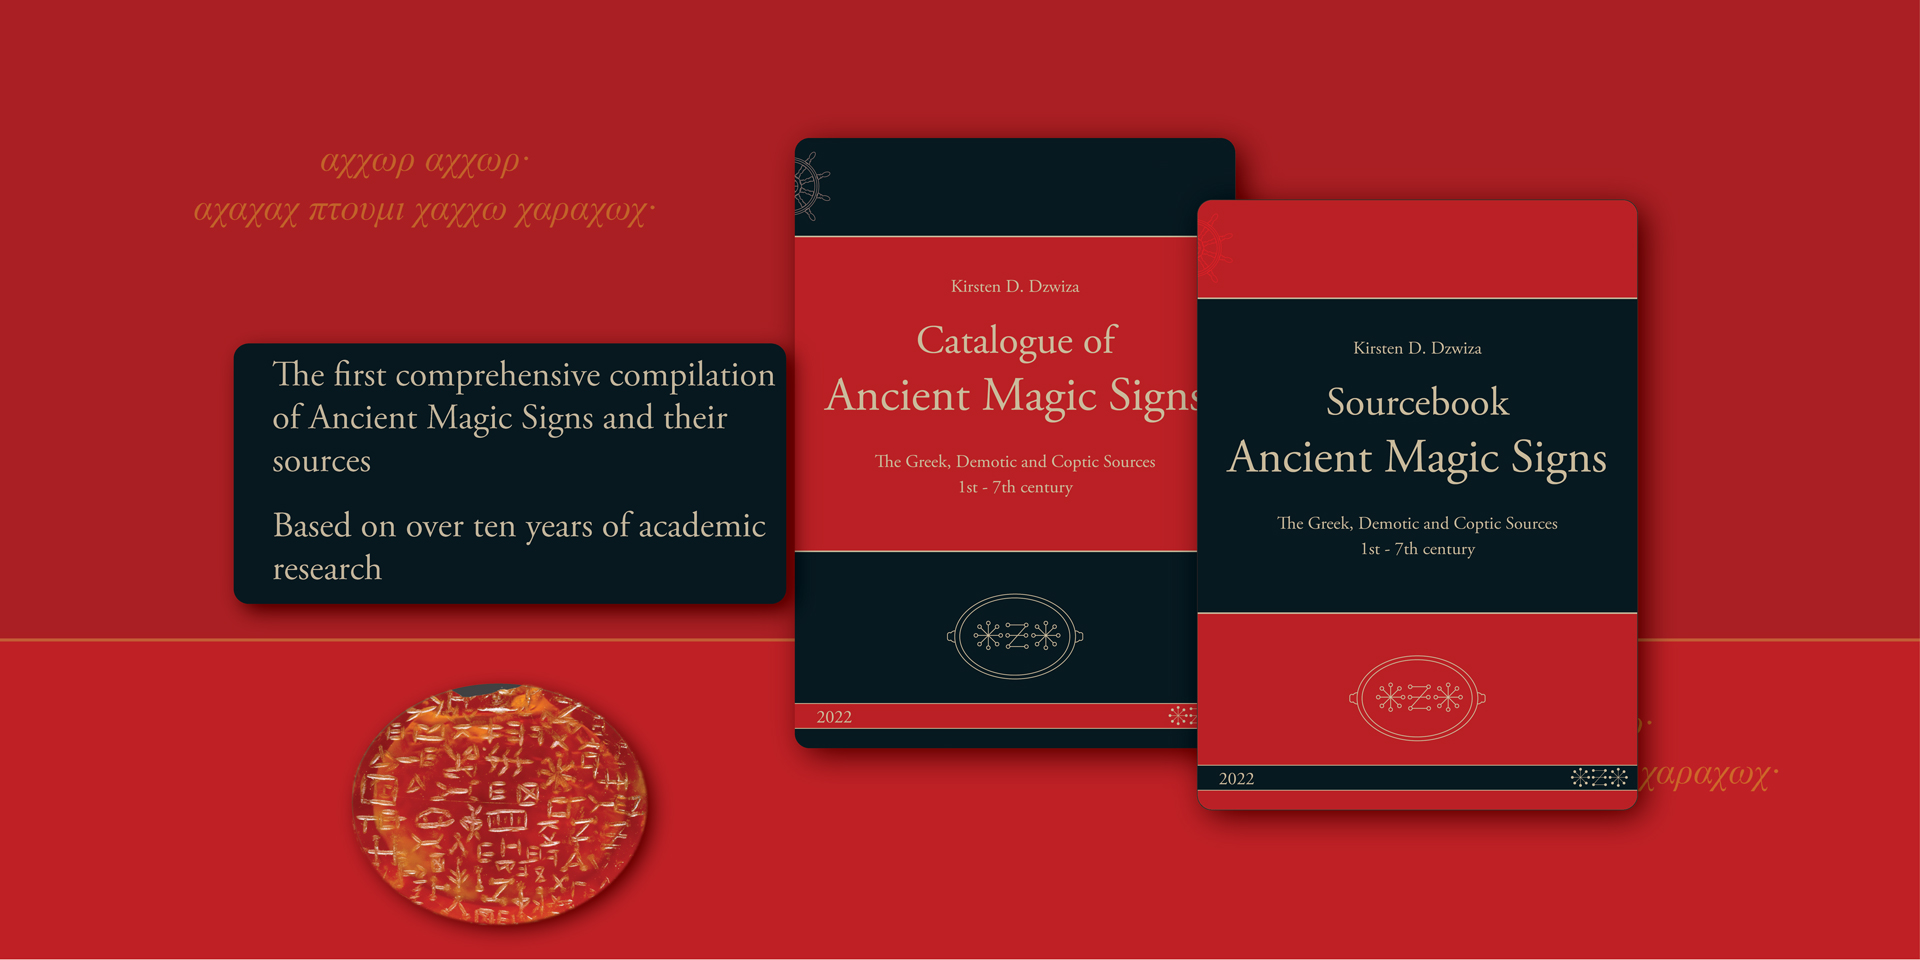 Covers of the Sourcebook of Ancient Magic Signs and Catalogue of Ancient Magic Signs